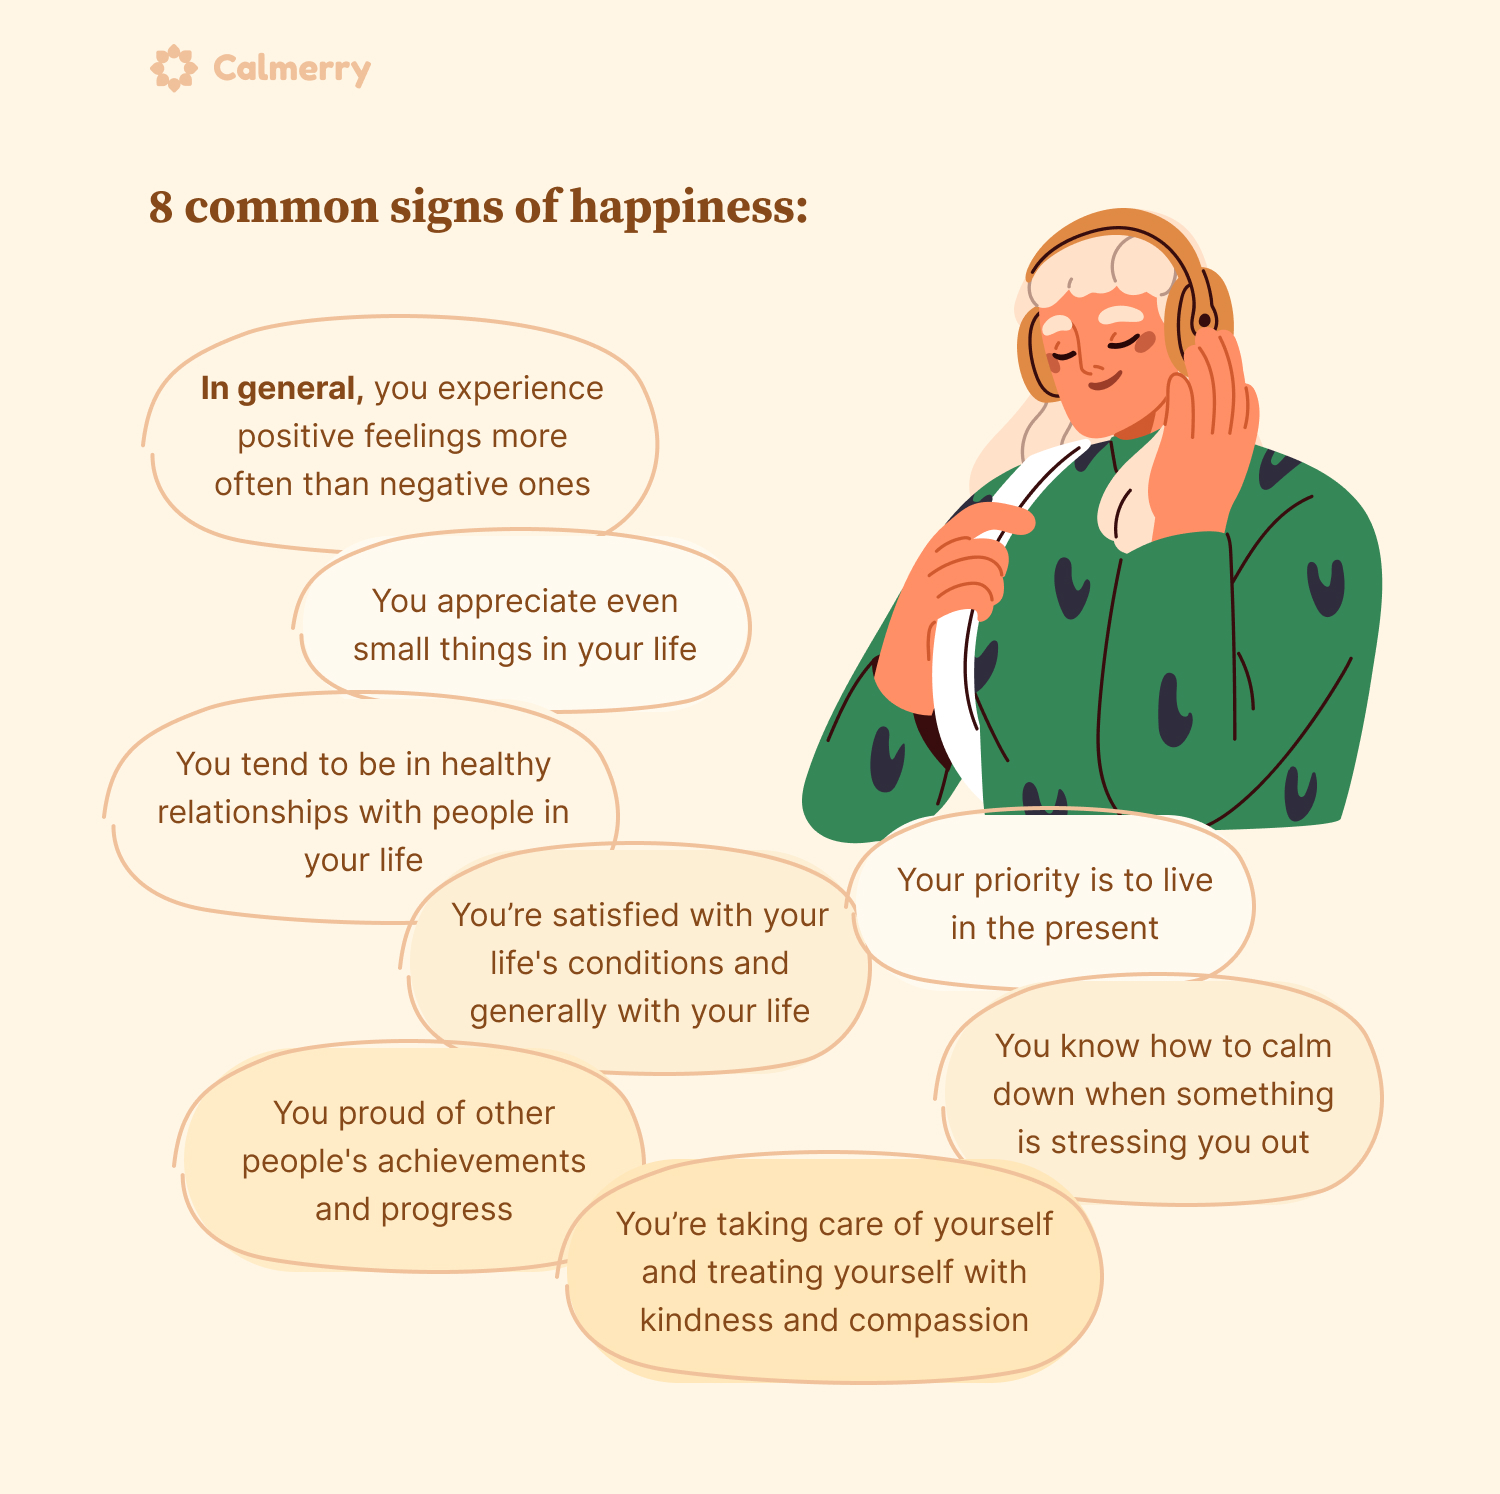 List of 8 common signs of happiness